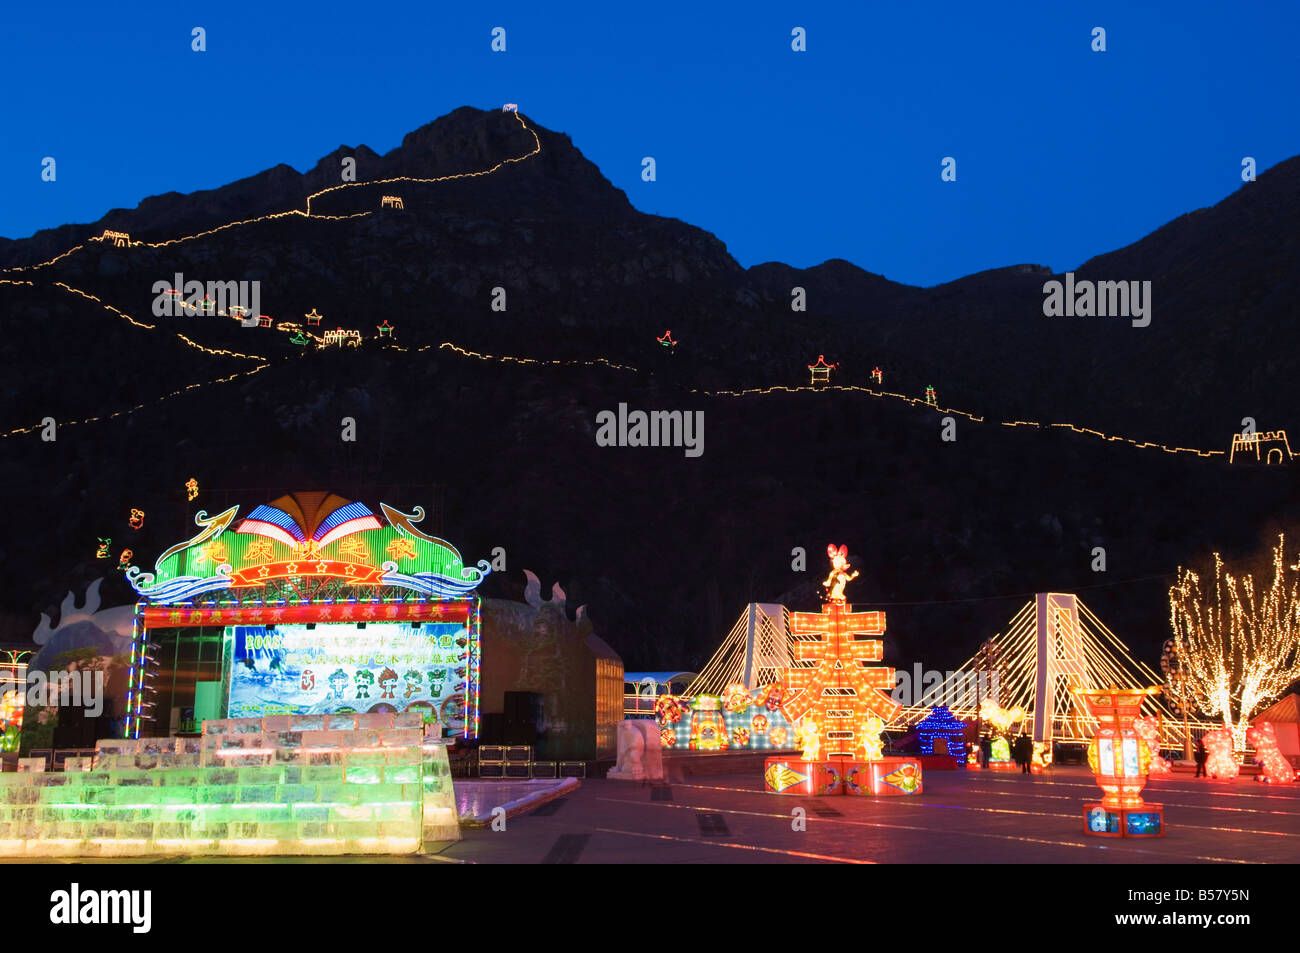 Display of night time illuminations and copy of the Great Wall of China at Longqing Gorge Ice sculpture festival, Beijing, China Stock Photo